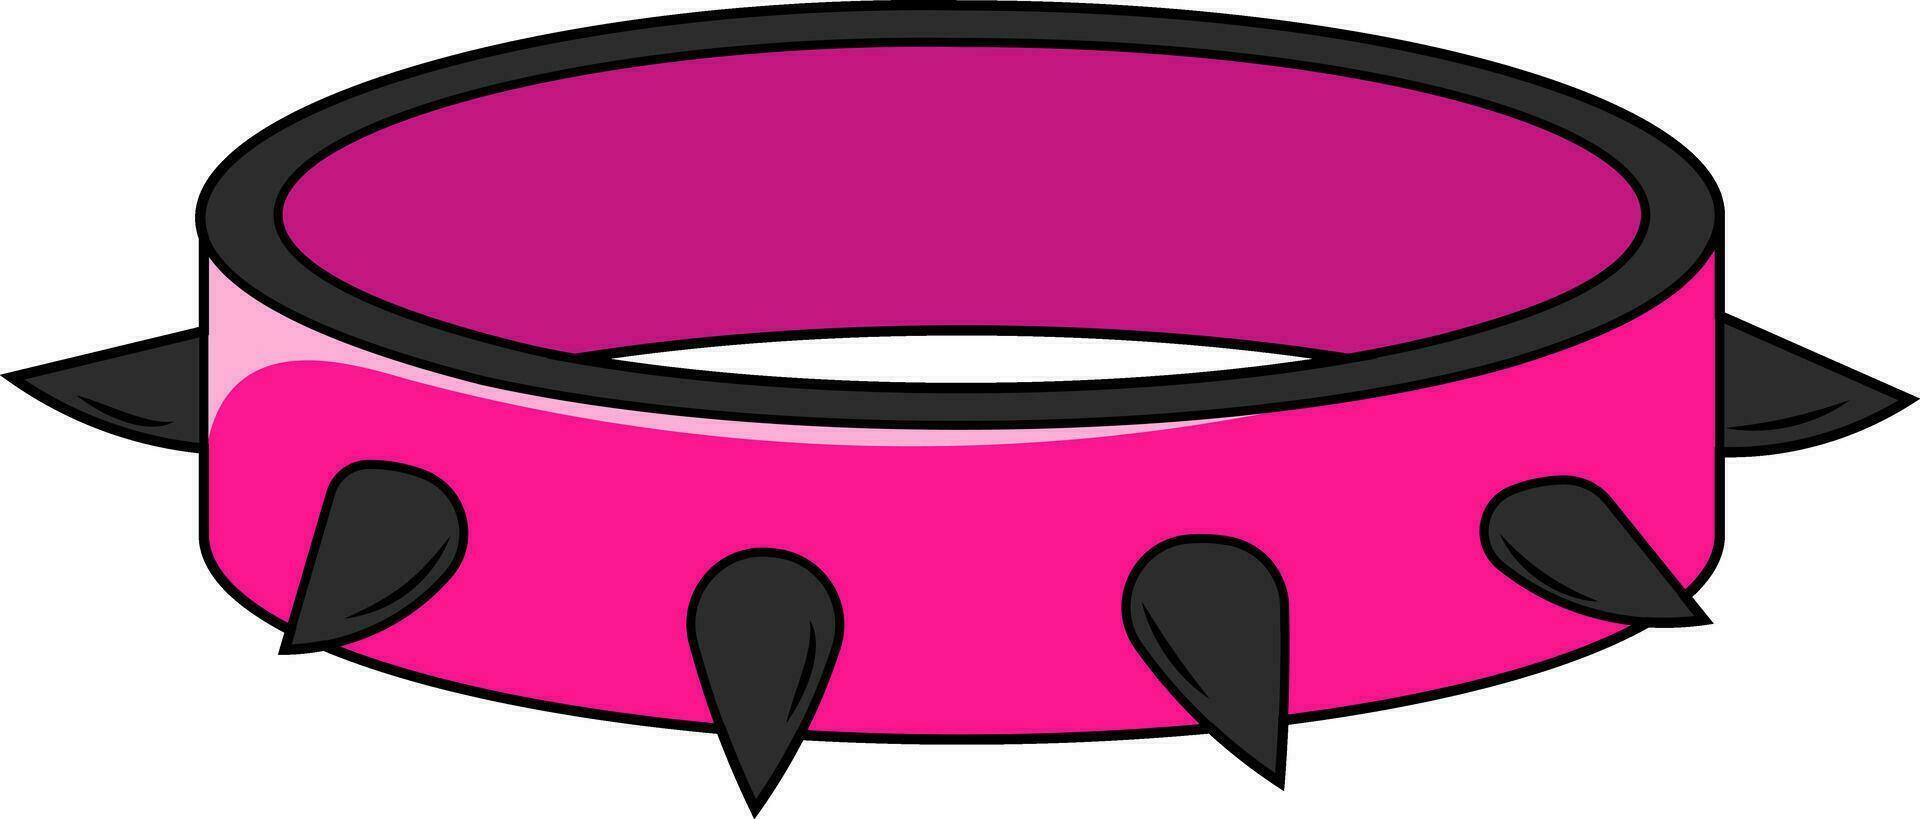 Emo collar with spikes, an accessory for glamorous rock in trendy 2000s colors black with acid pink on transparent background vector